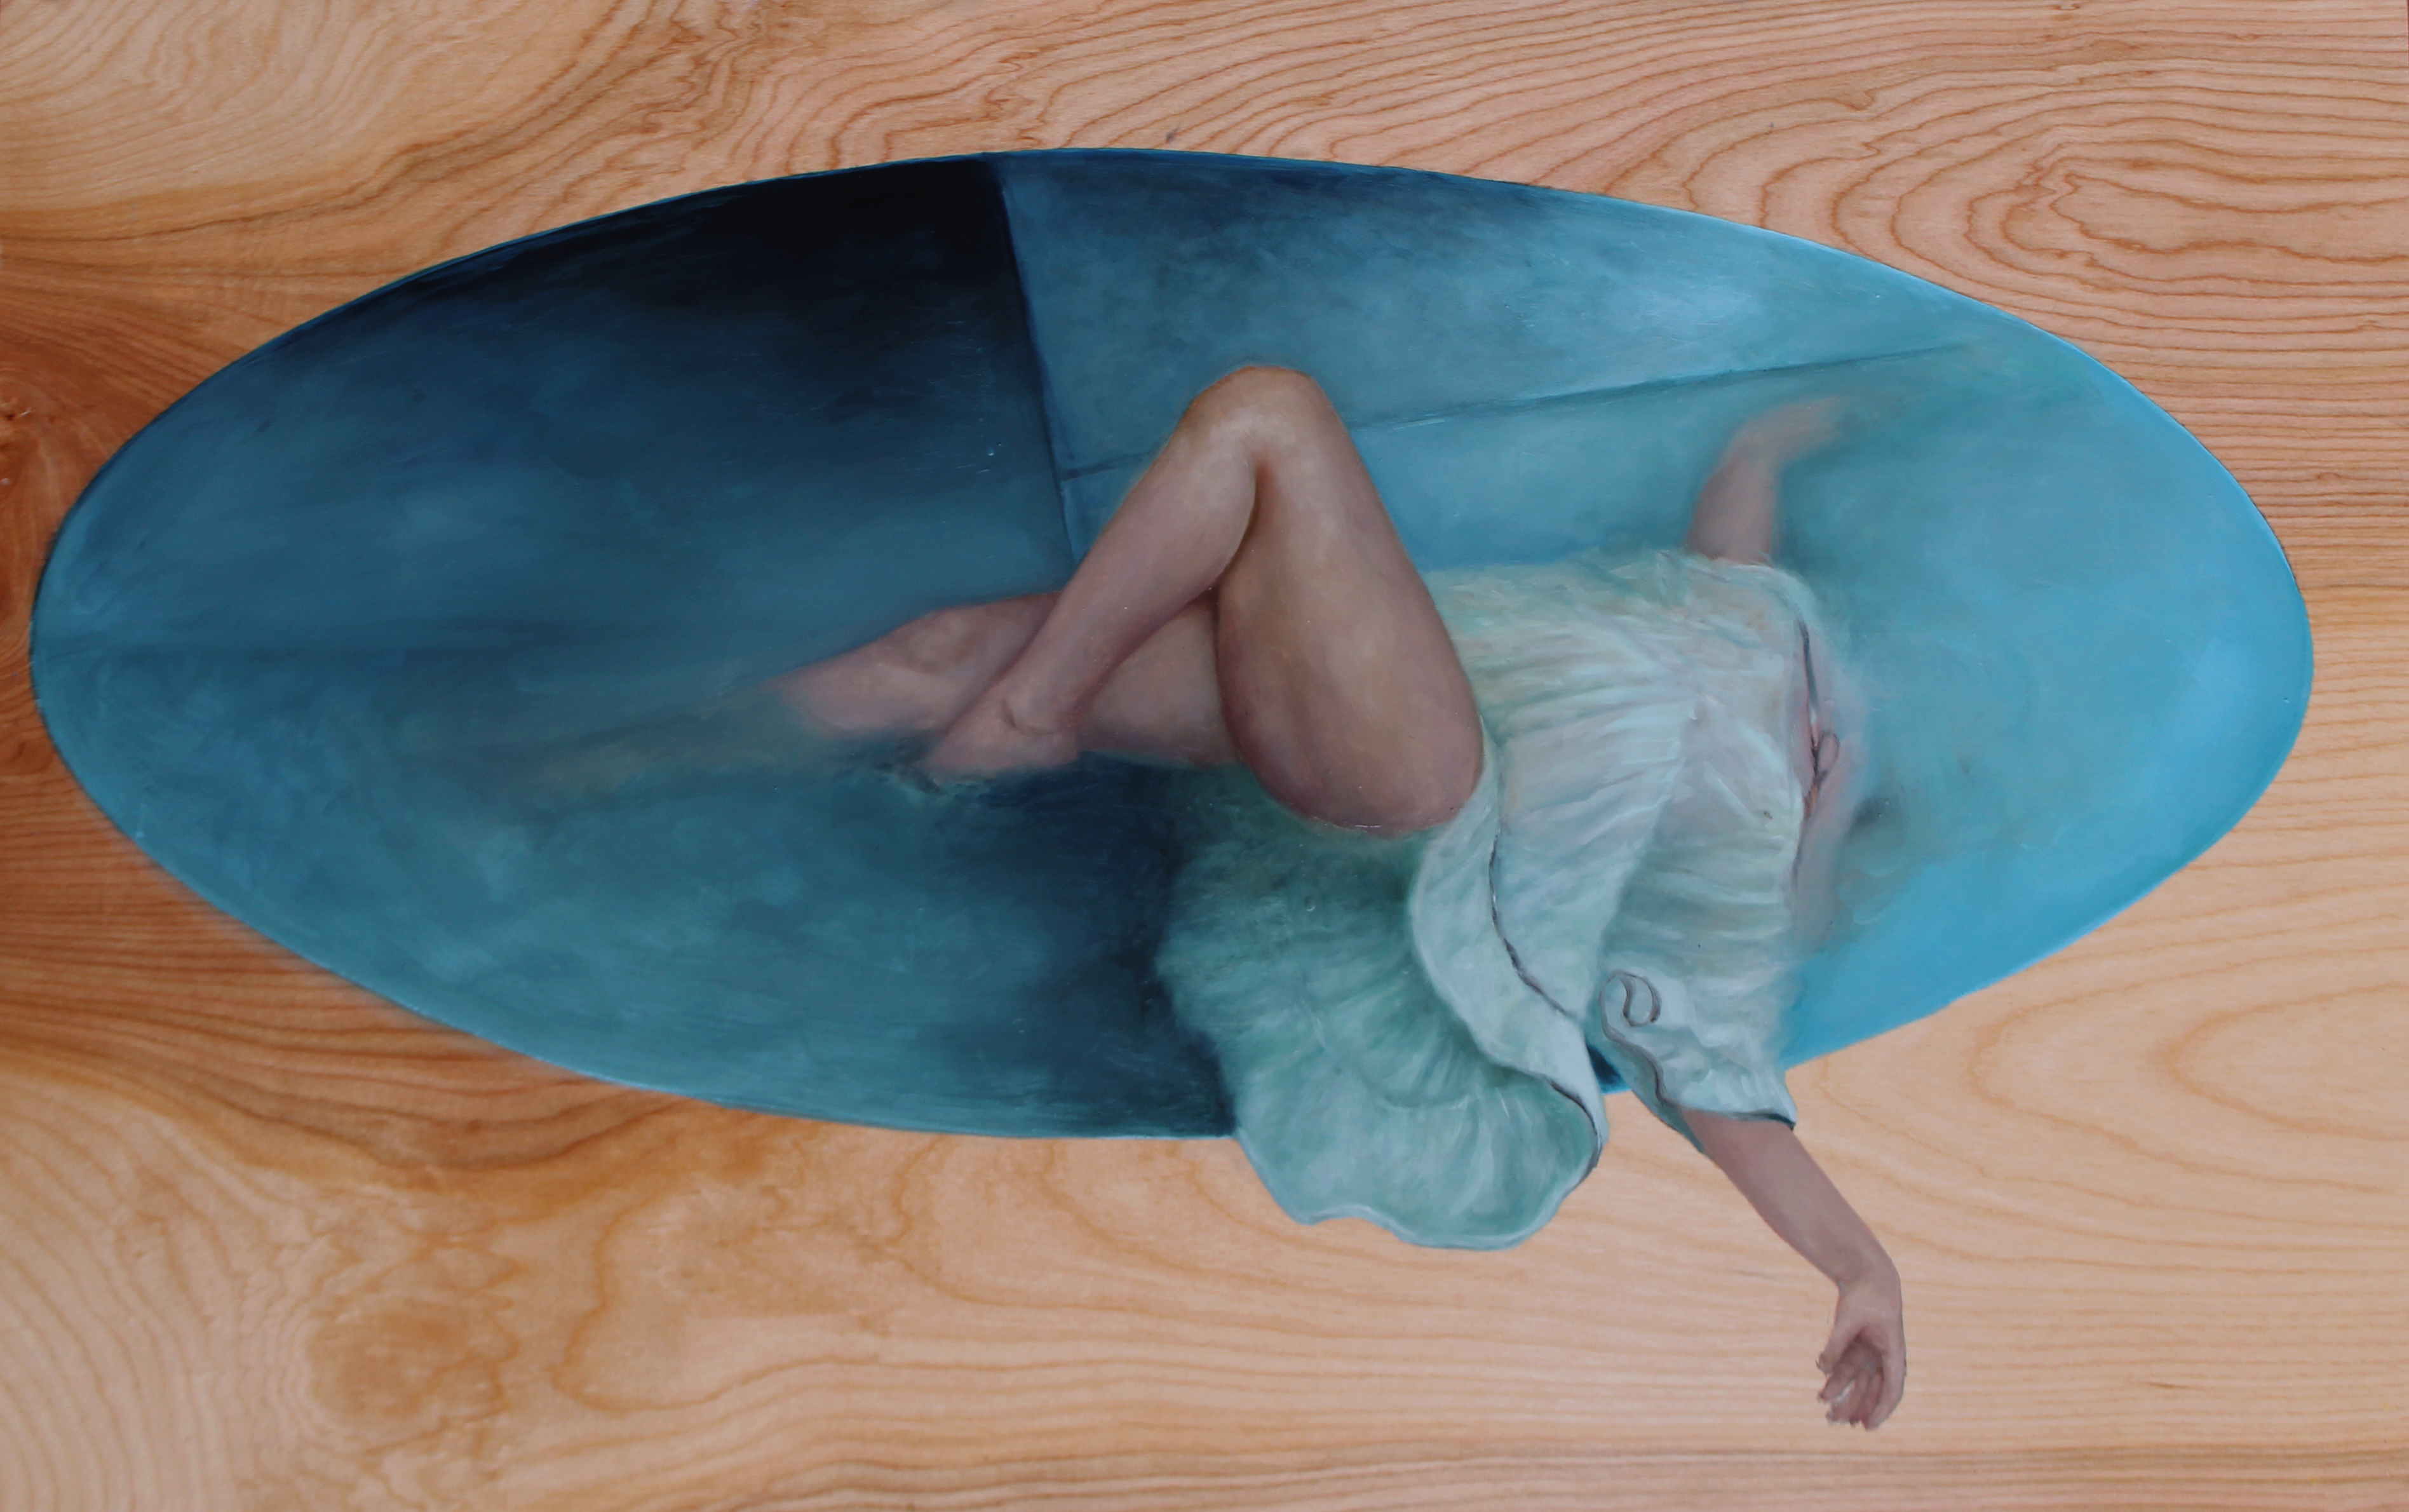 In Plowdrey's elegant, erotically charged paintings, the interplay between land and sea becomes a dance of procreation, with the female figure standing in as Venus. The installation is layered with video of Keys residents that speaks to their connection to the landscape.